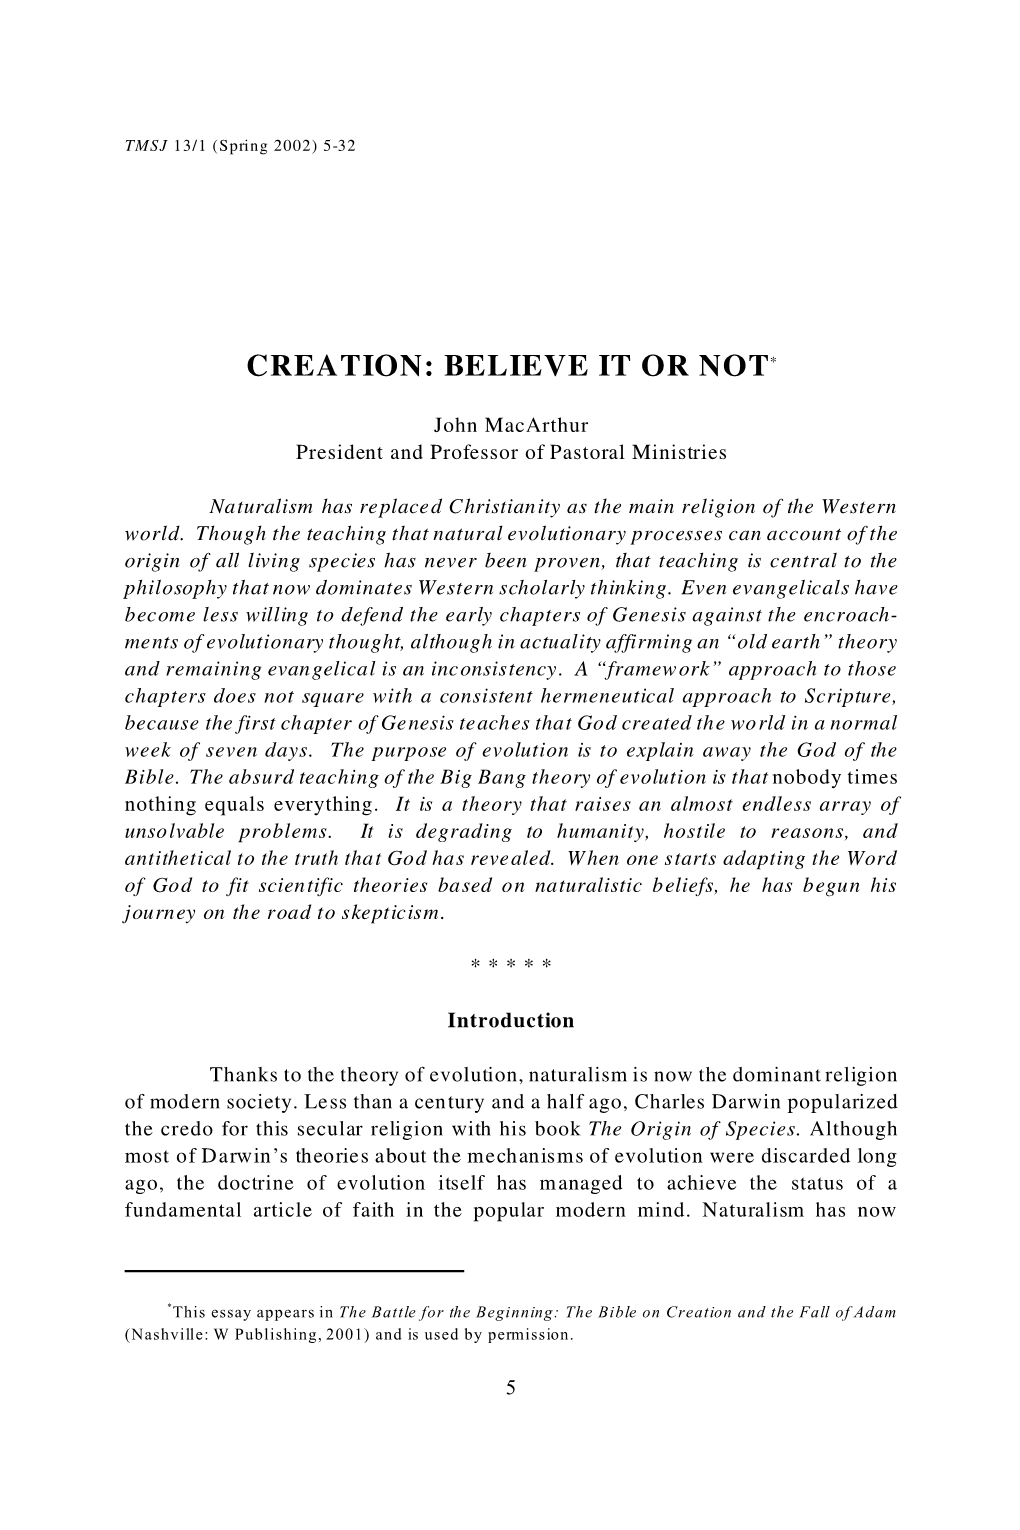 Creation: Believe It Or Not*